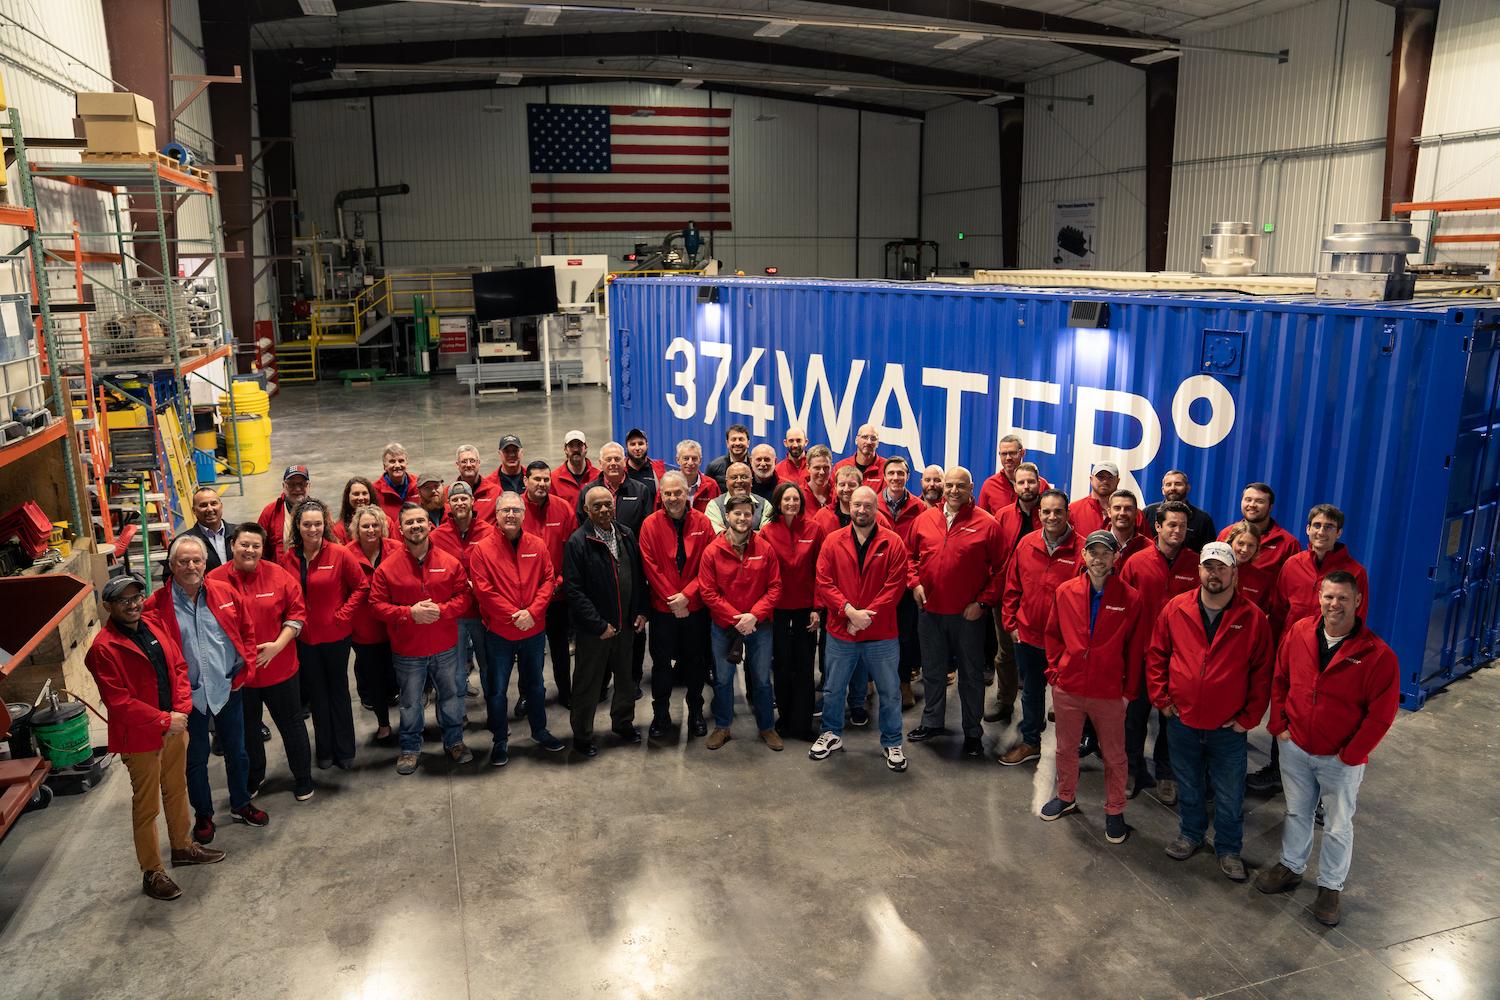 374water team in front of a reactor housed in a shipping container that can eliminate PFAS from wastewater